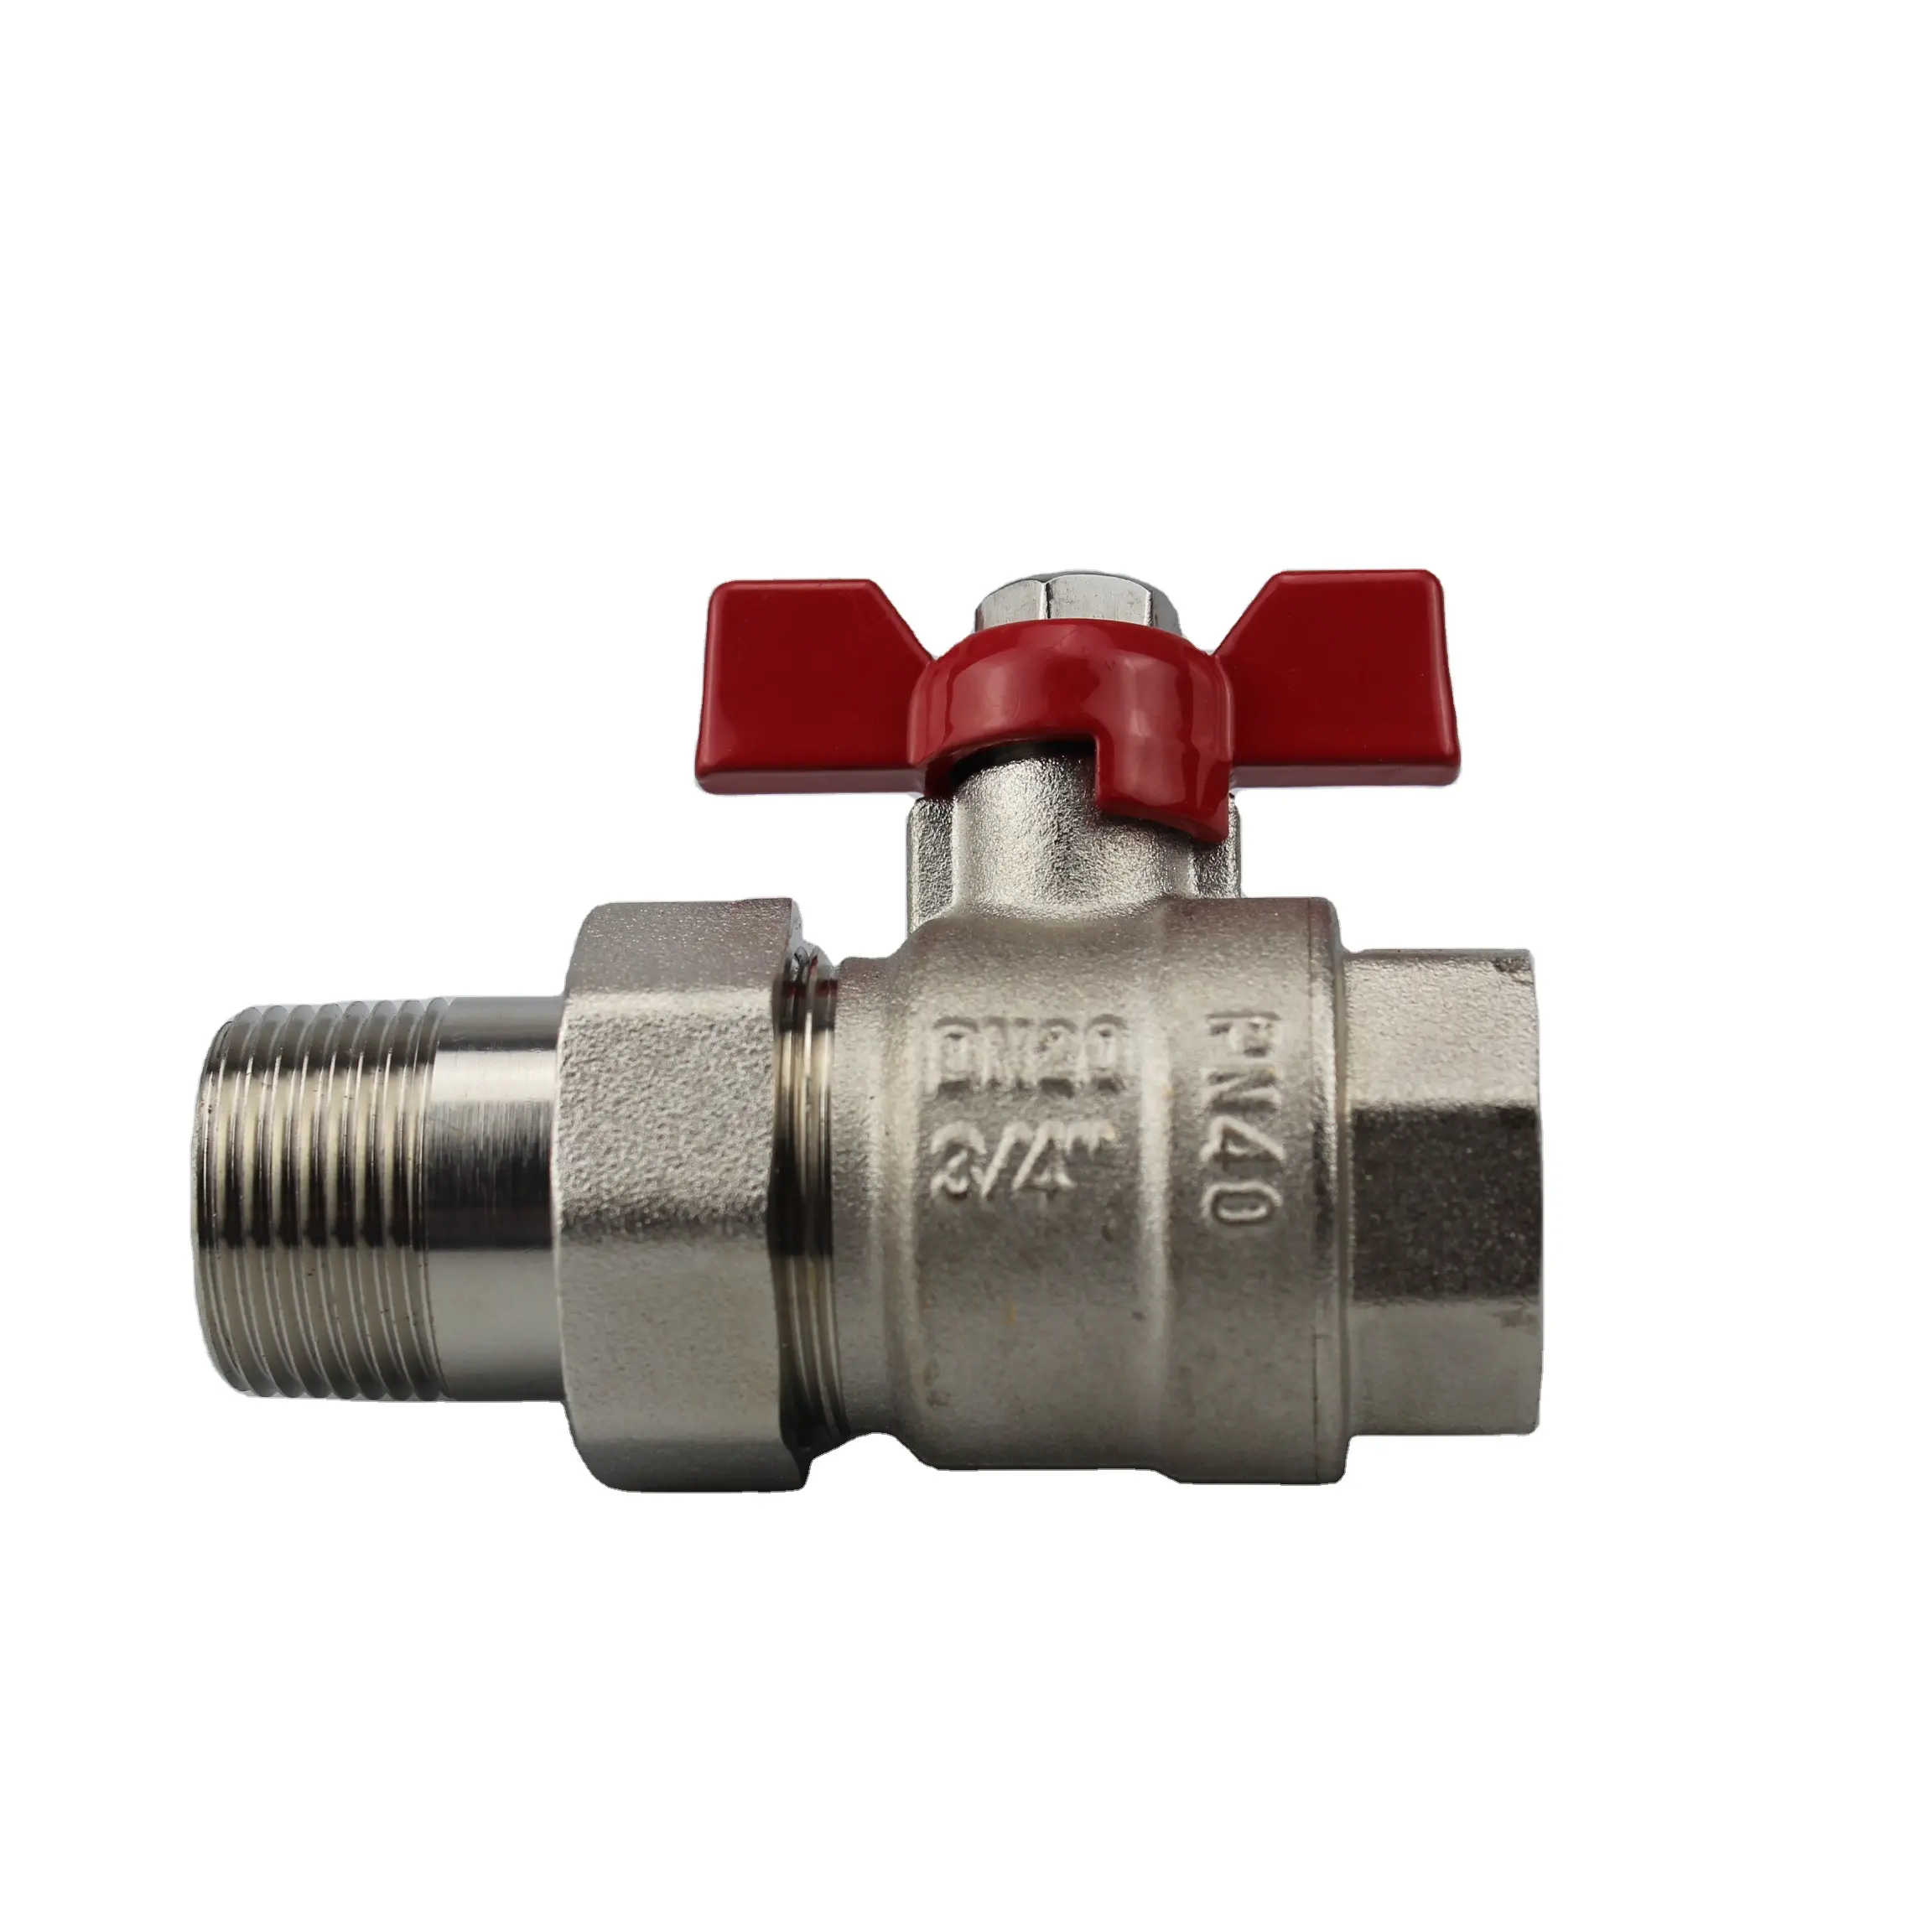 PN40 Ball Valve Female and Male Brass Valve with Union Connector Aluminum Handle